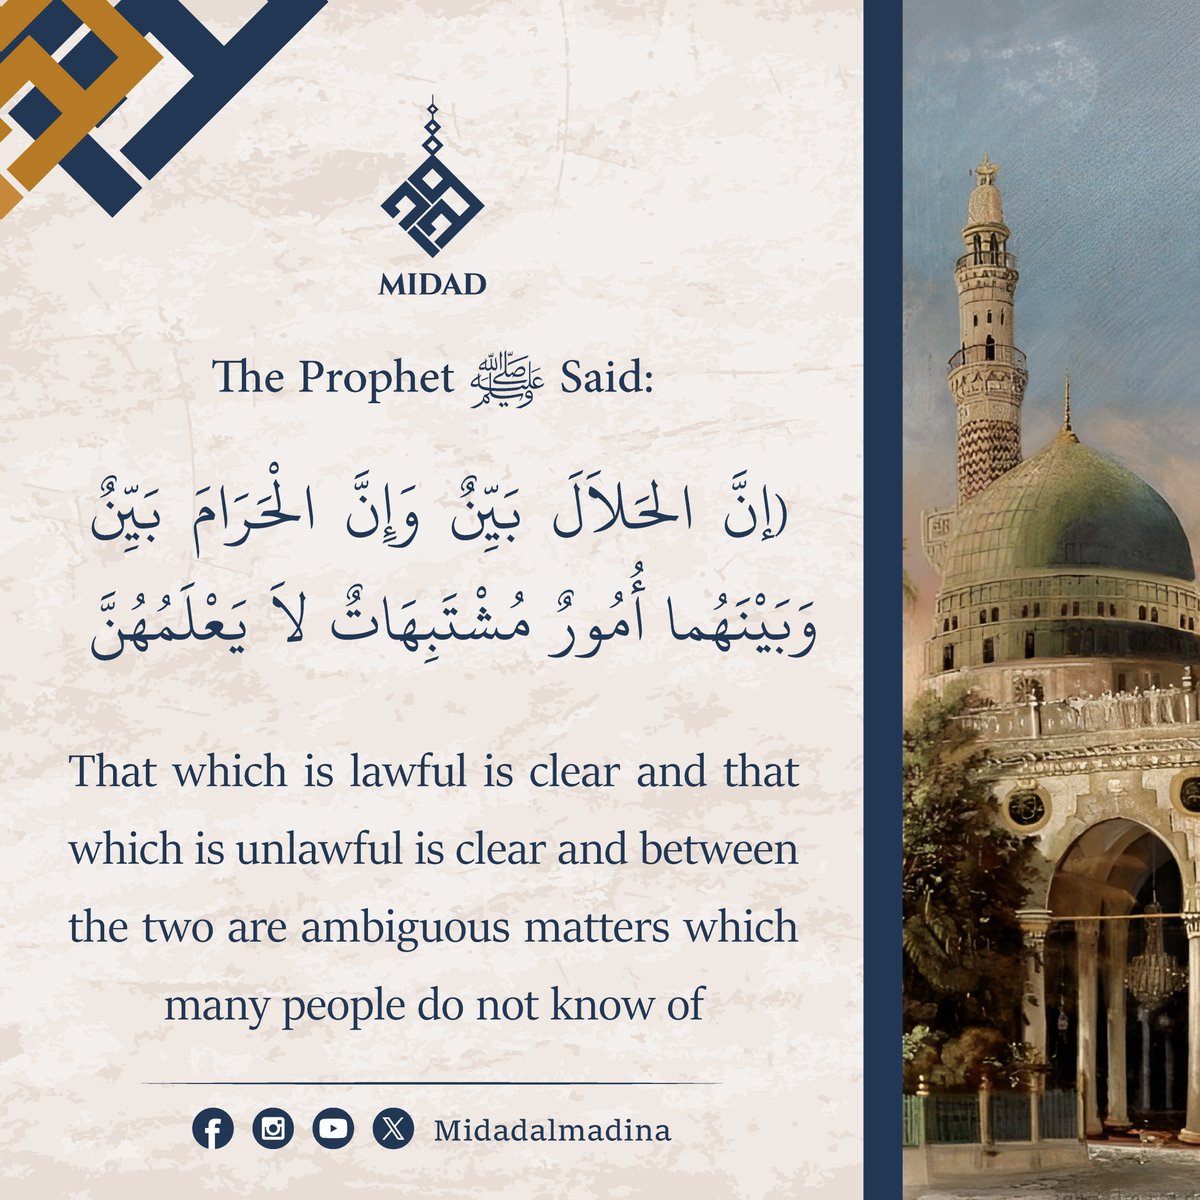 Our prophet said:
'That which is lawful is clear and that which is unlawful is clear and between the two are ambiguous matters which many people do not know of.'

#MidadAlmadina #hadithquotes #arabic #arabiclanguage #learnarabic #arabicculture #arabicconversation